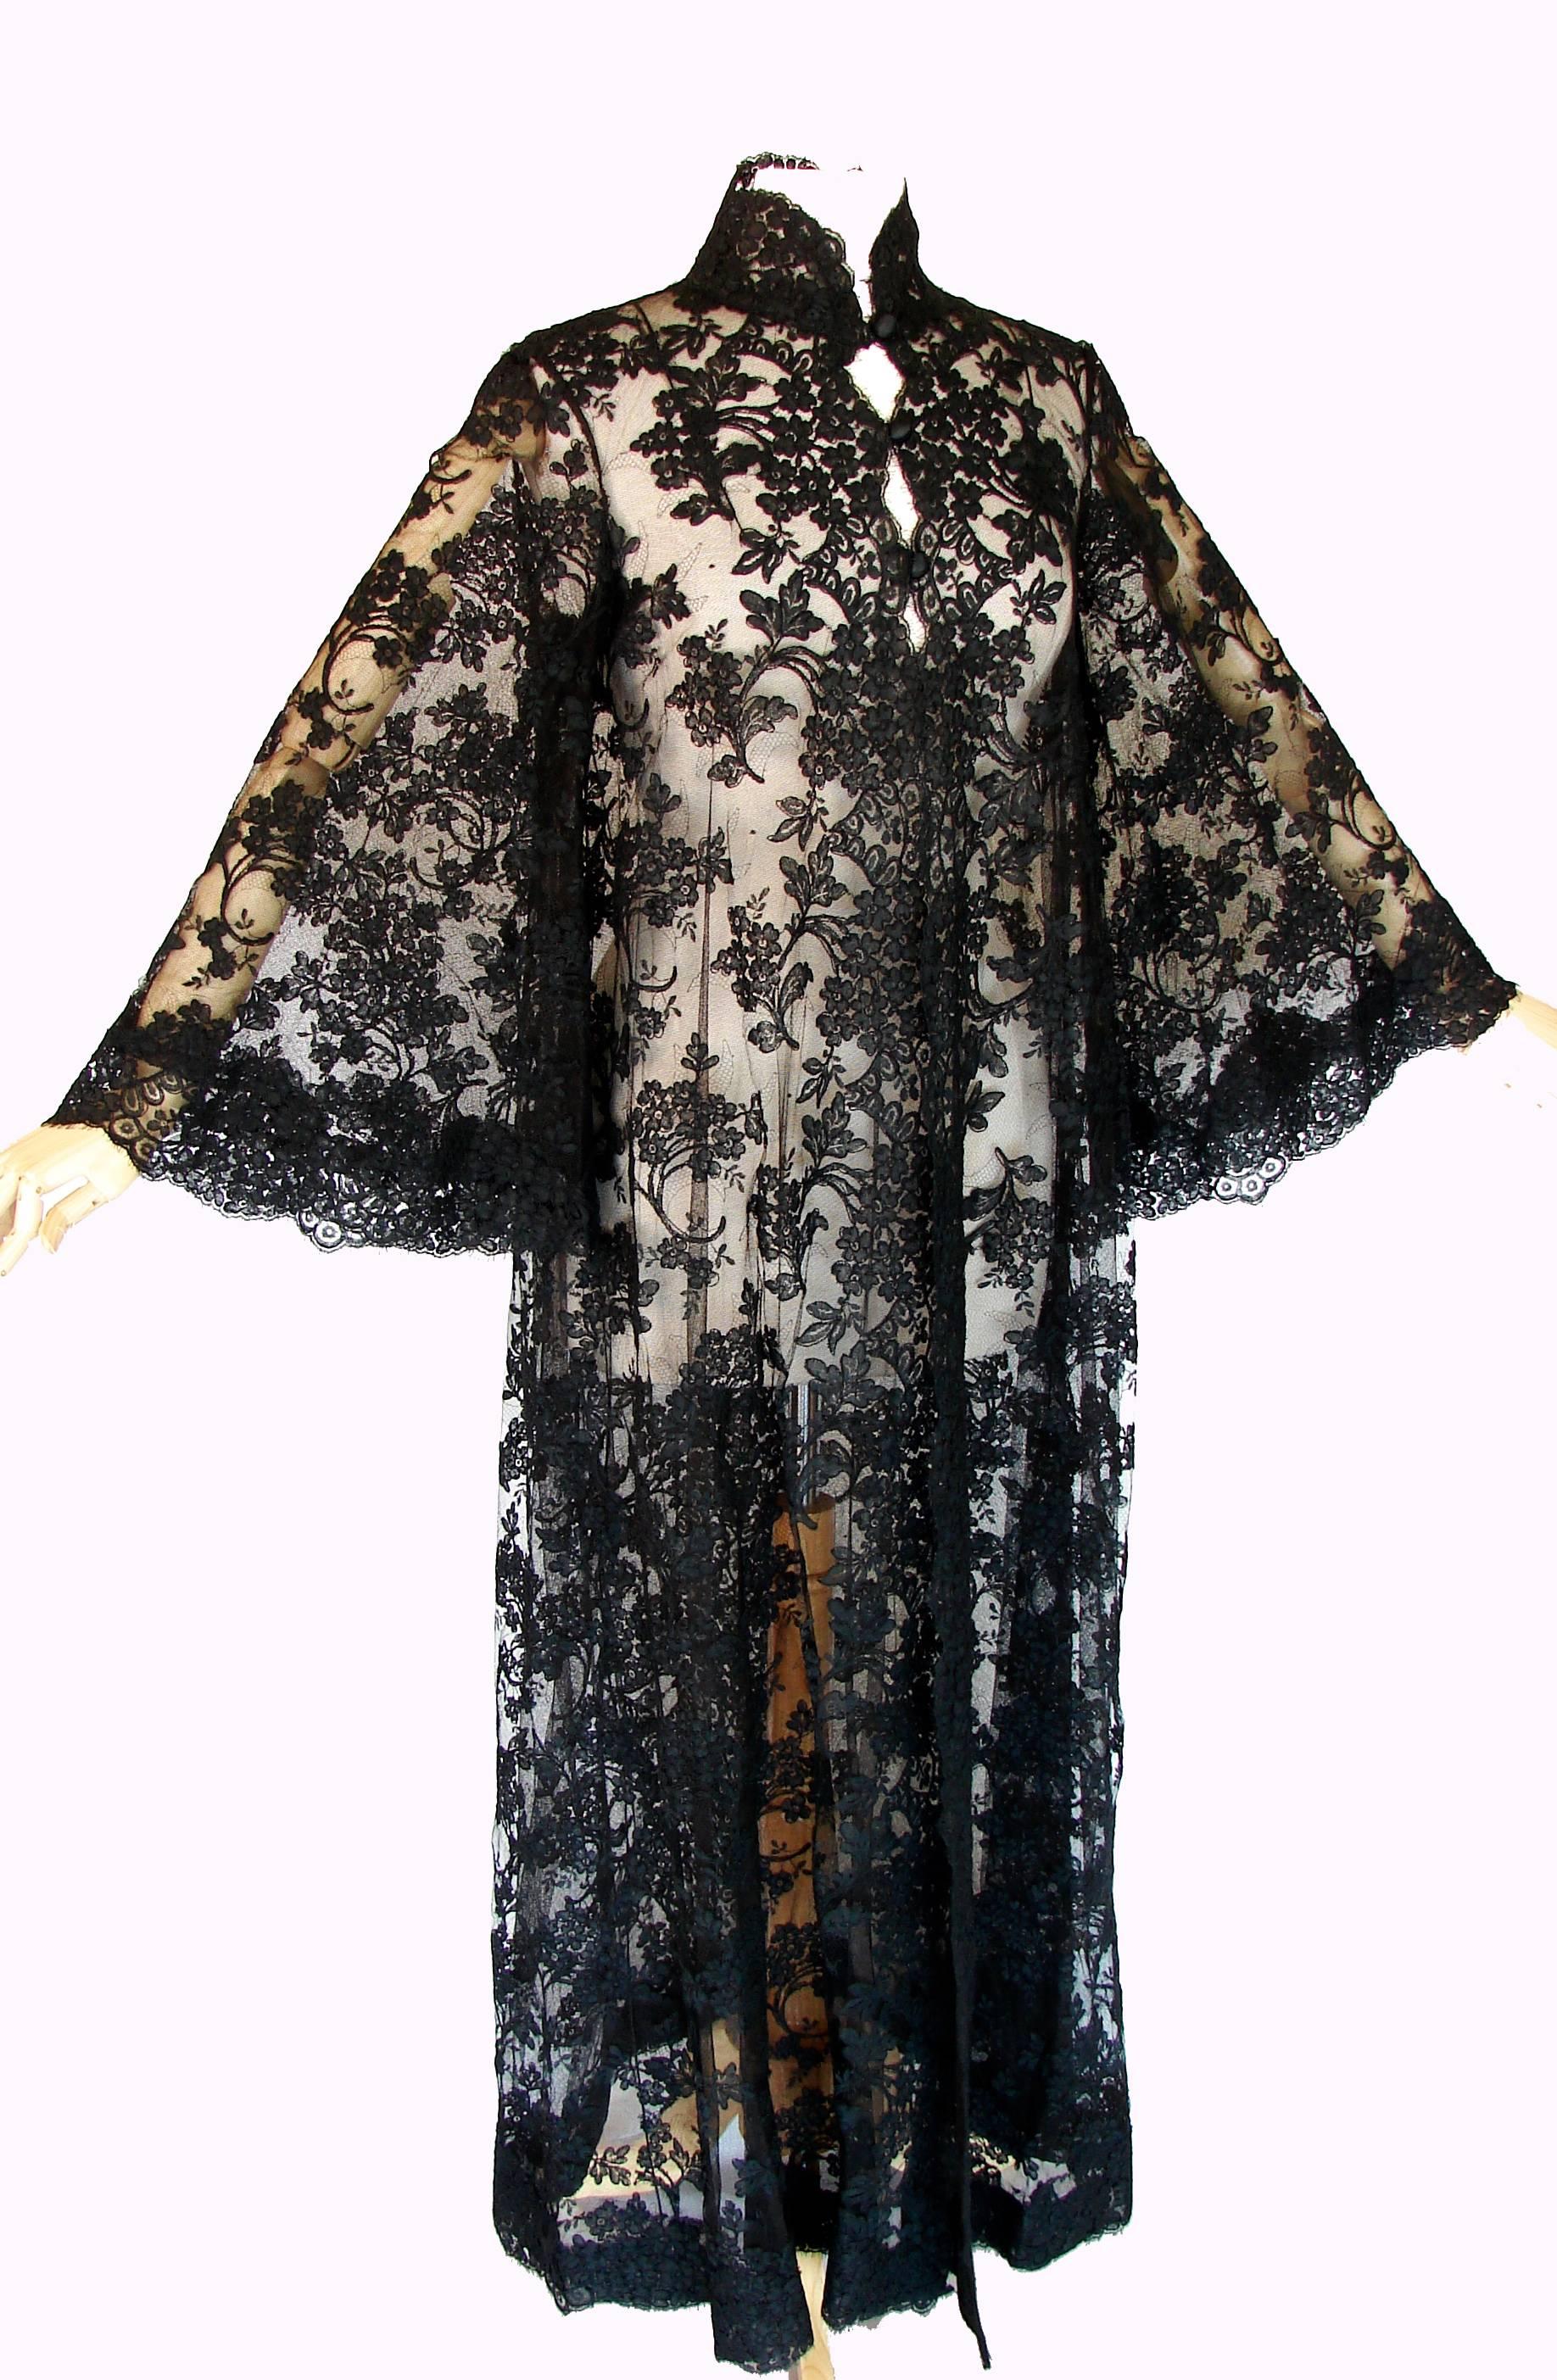 Ron Amey Attr. Fabulous Black Lace Opera Coat with Angel Sleeves Size M 1970s 1